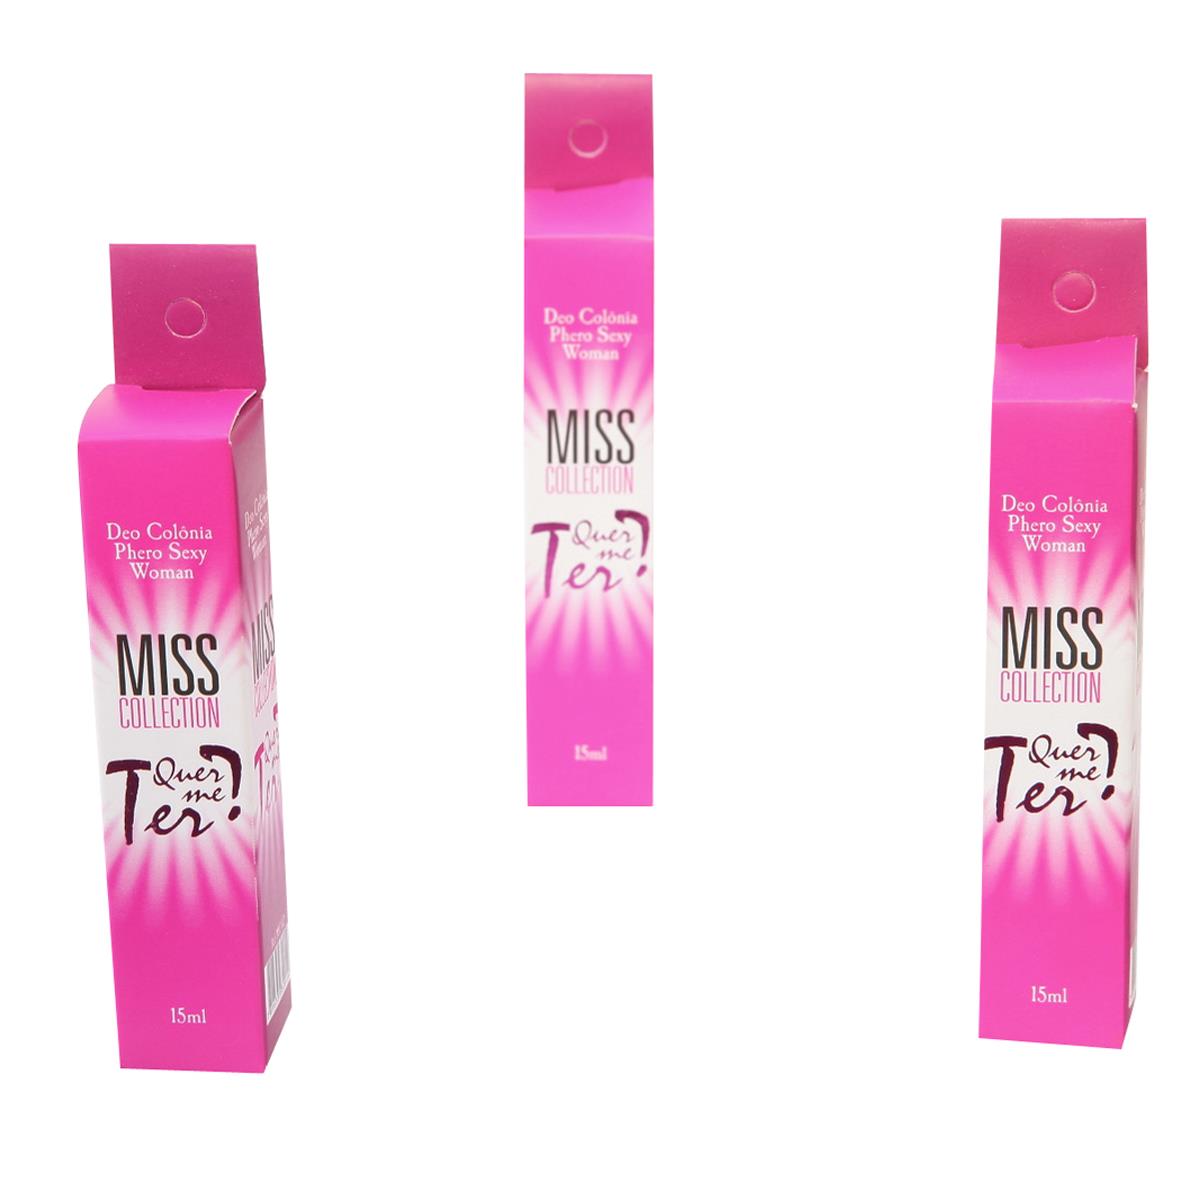 Deo Colônia Phero Sexy Woman Quer me Ter ? 15ml Miss Collection